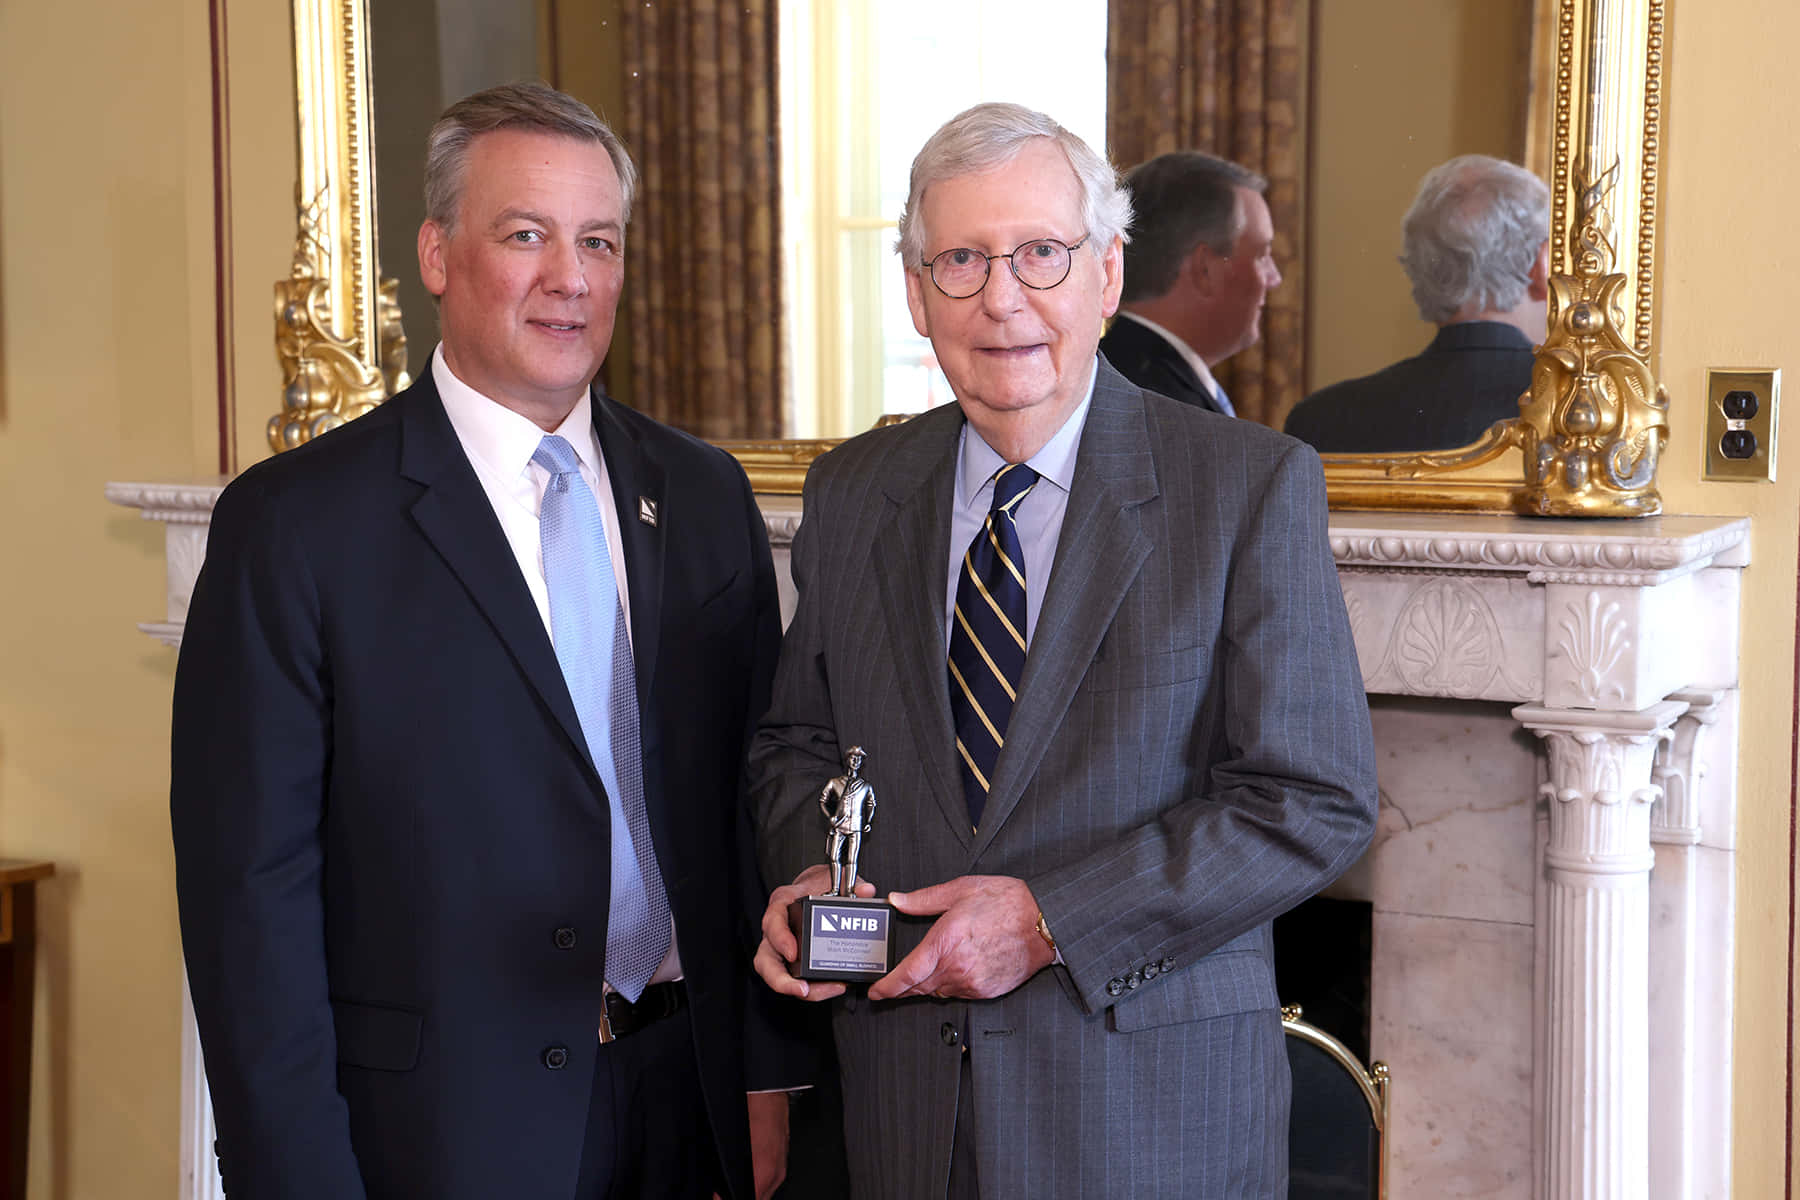 Mitch McConnell Accepting NFIB Award Wallpaper